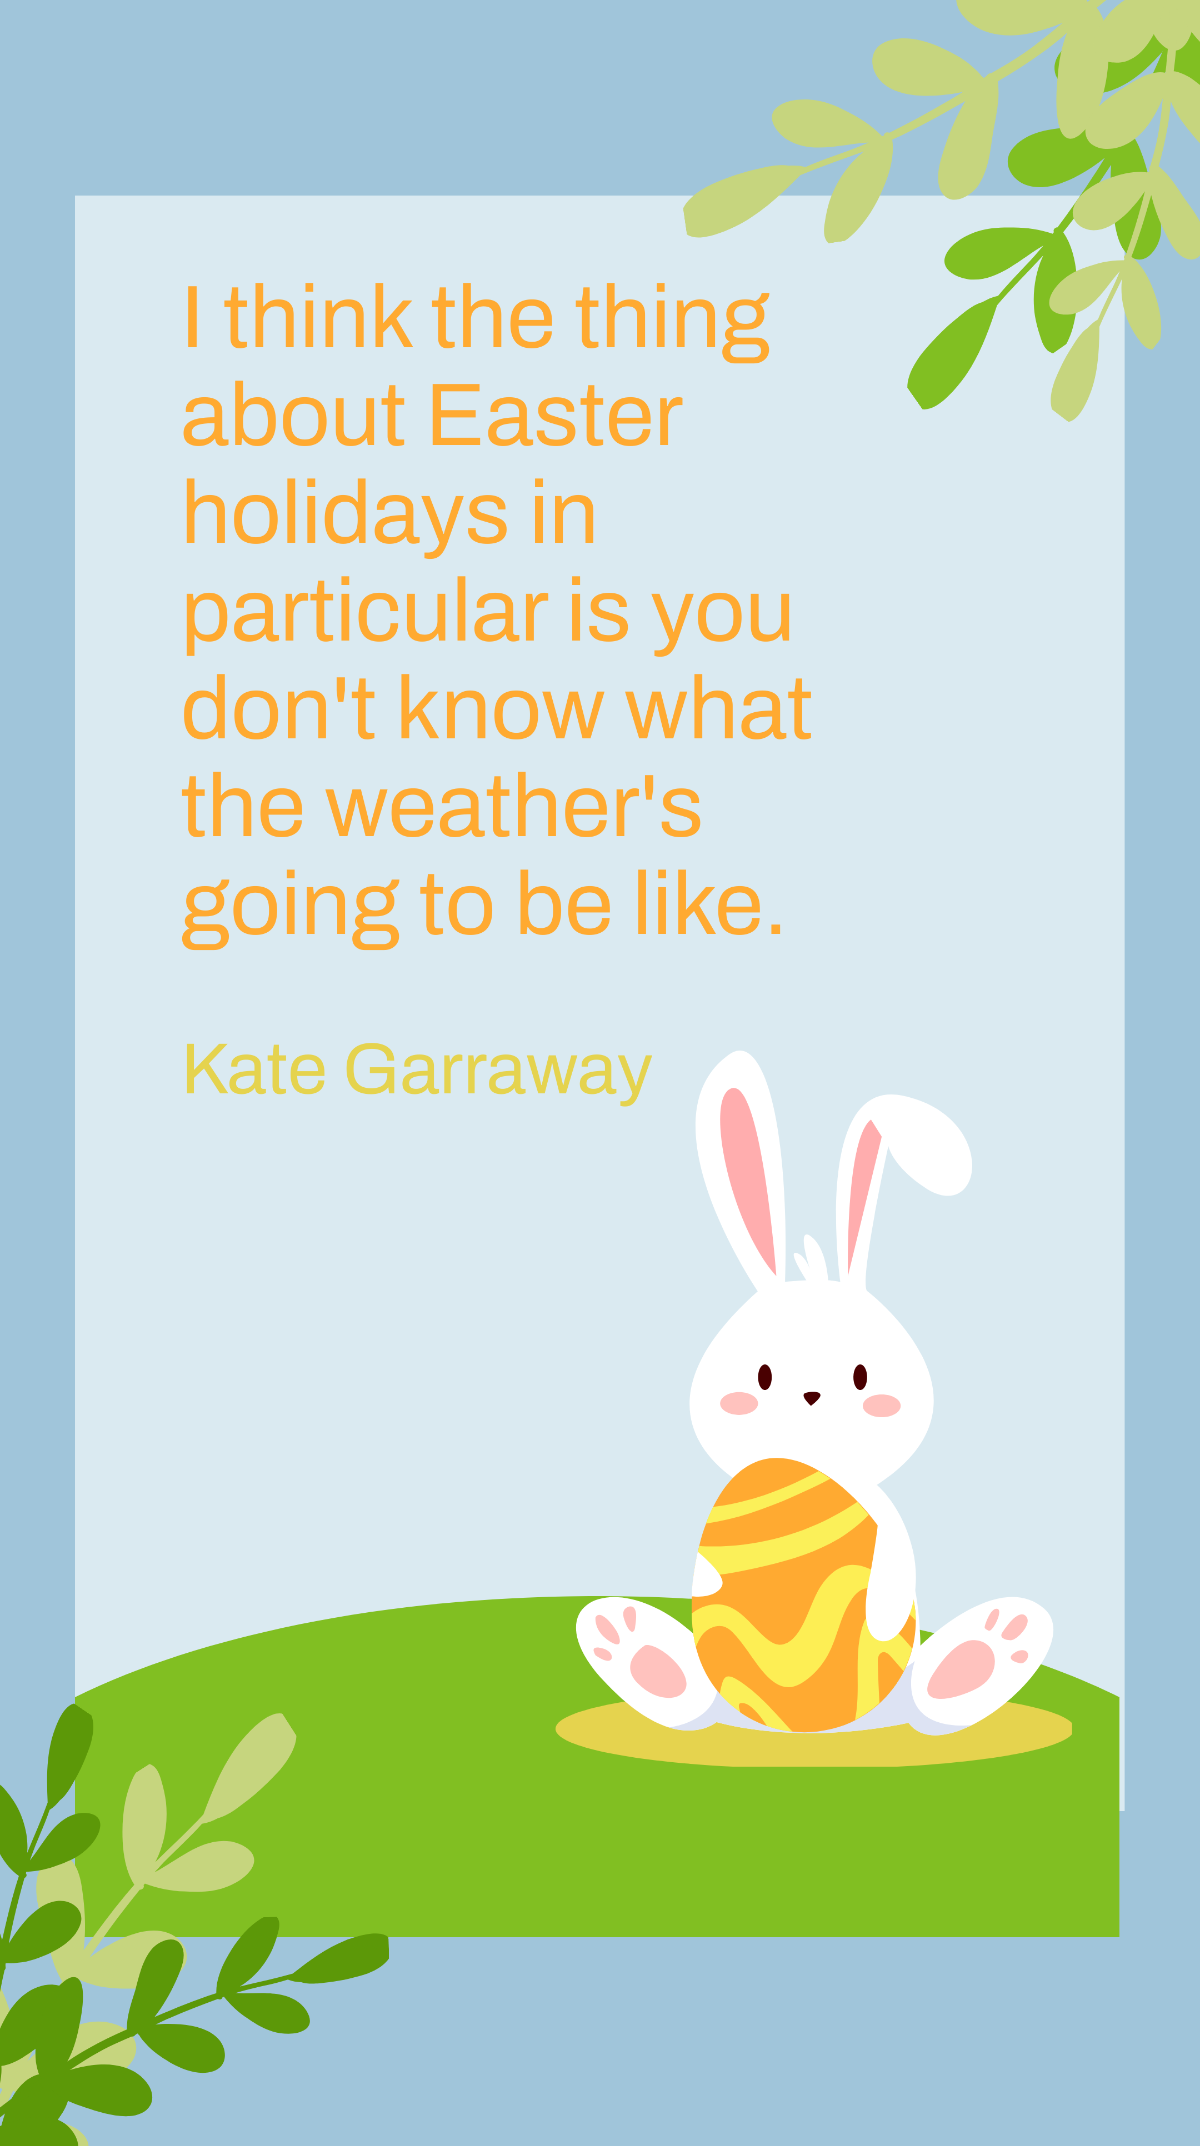 Kate Garraway - I think the thing about Easter holidays in particular is you don't know what the weather's going to be like. Template